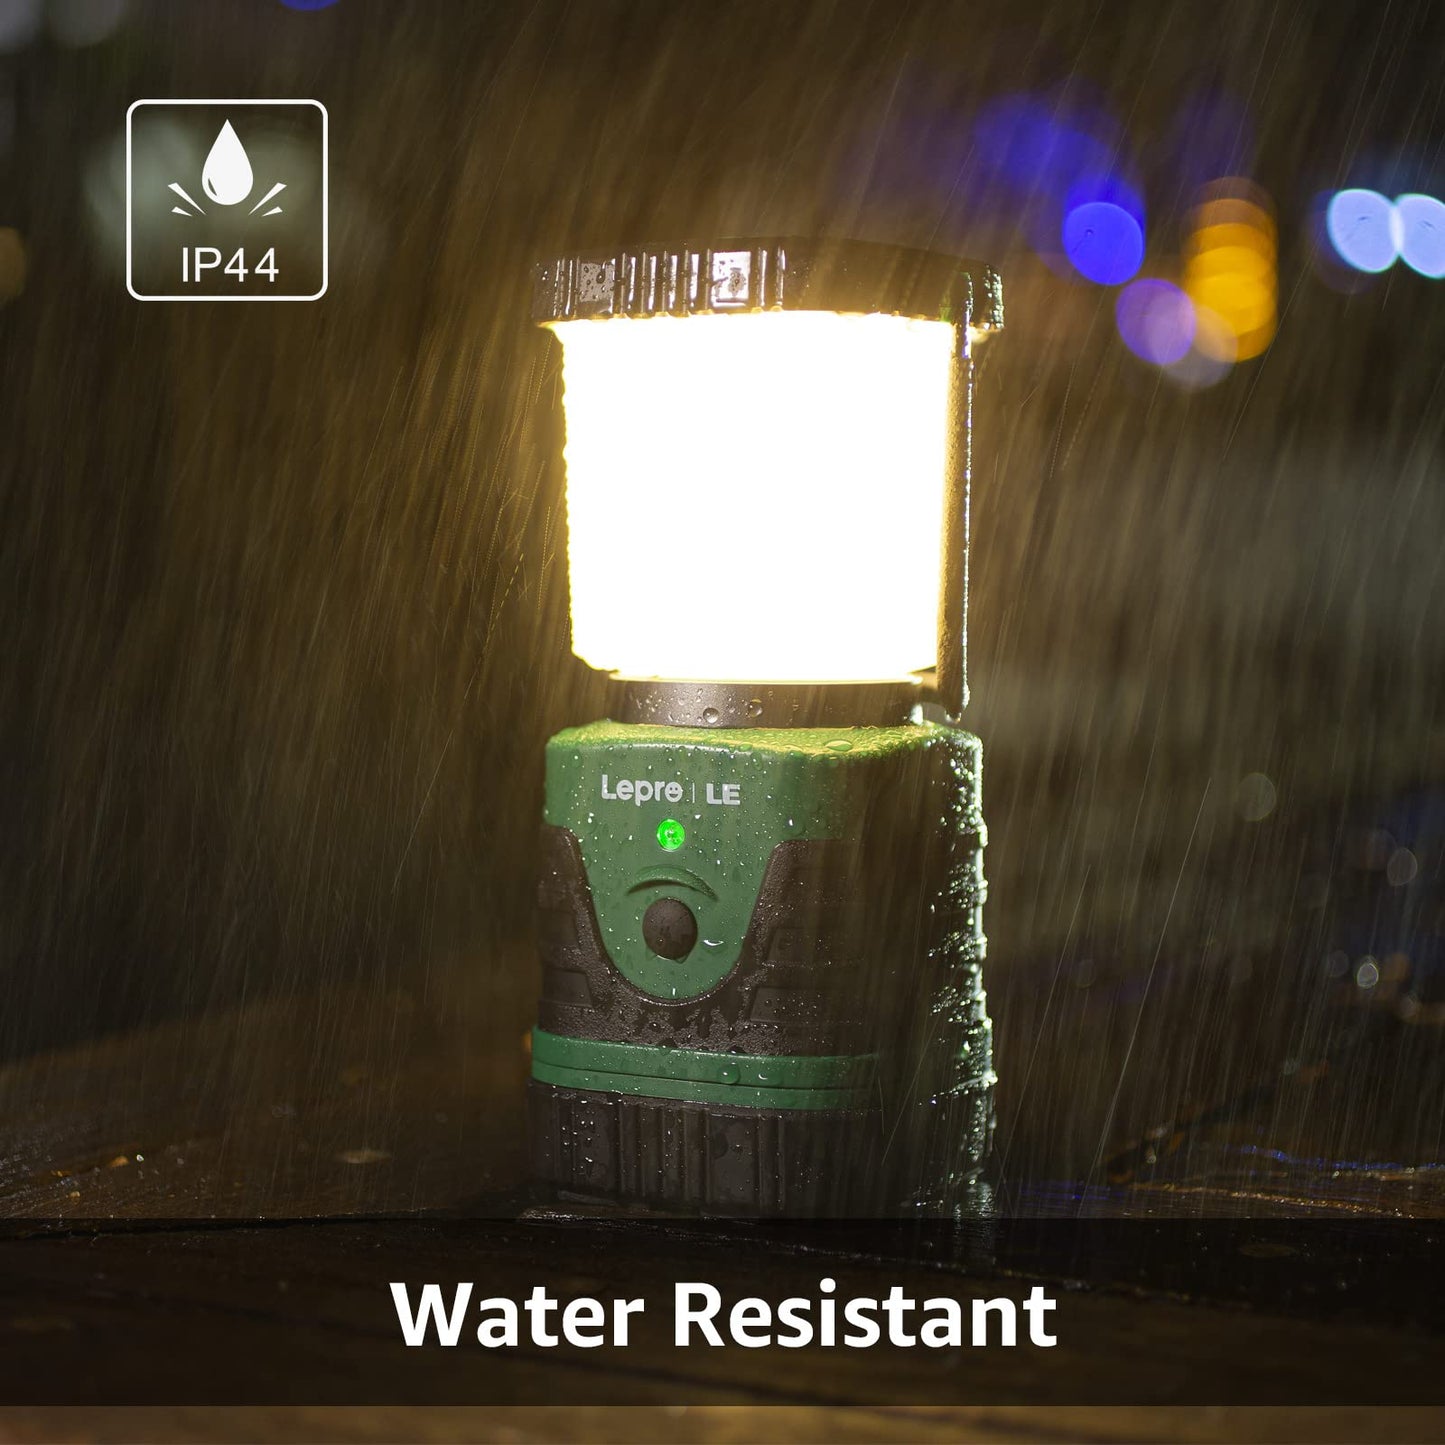 Lighting EVER 1000LM LED Camping Lantern Rechargeable, 4400mAh Power Bank, Camping Essential with 4 Light Modes, IP44 Waterproof Lantern Flashlight for Hurricane Emergency, Hiking, USB Cable Included